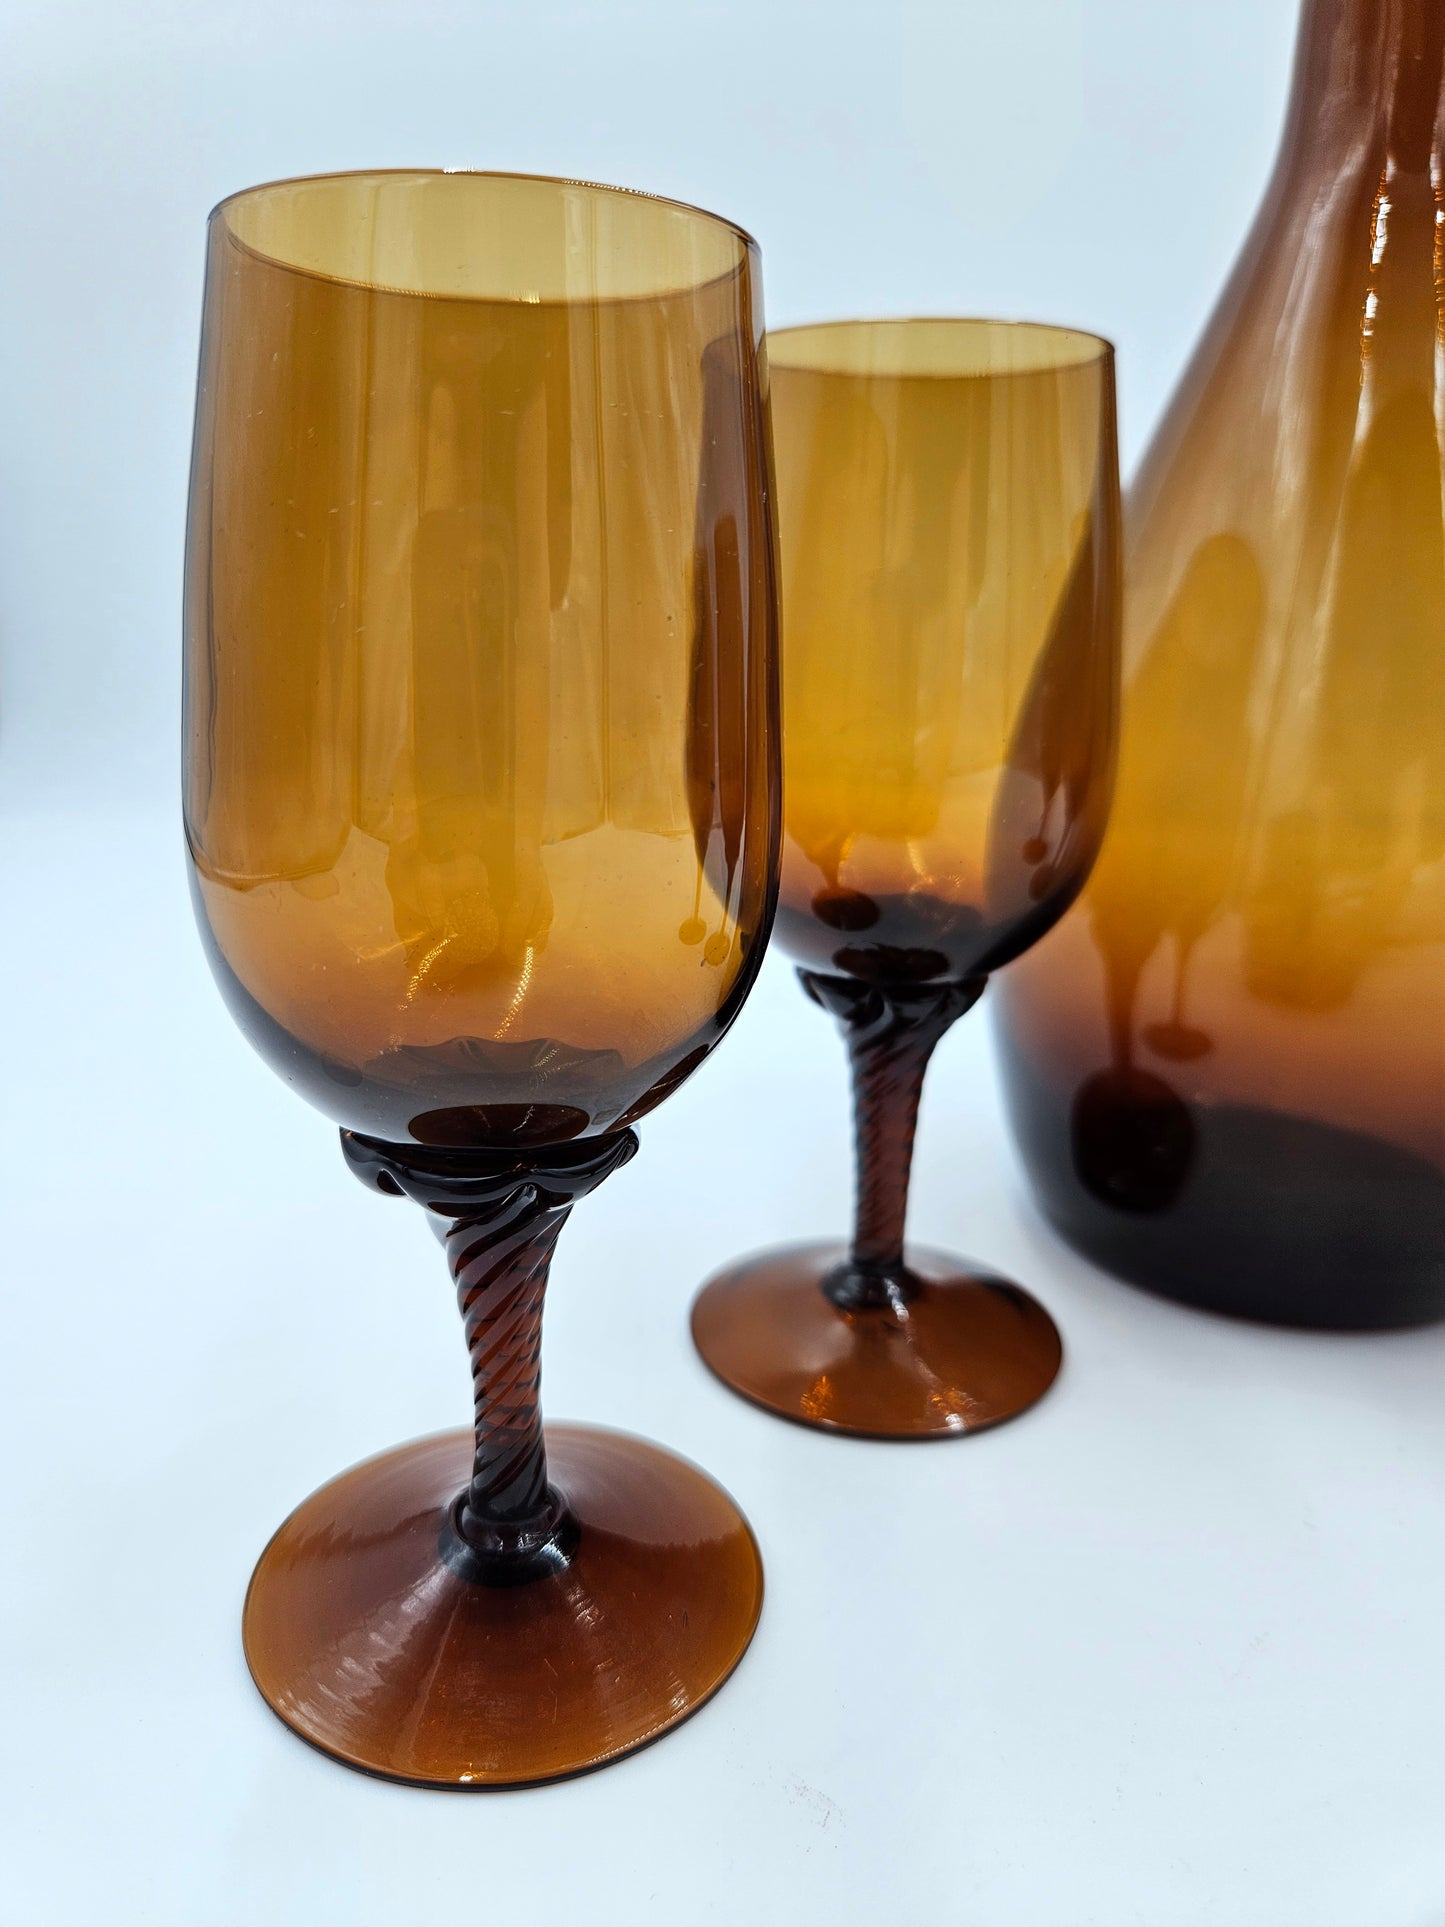 Mid Century Amber Glass Decanter Botter And Wine Port Glasses Set 6 Pieces